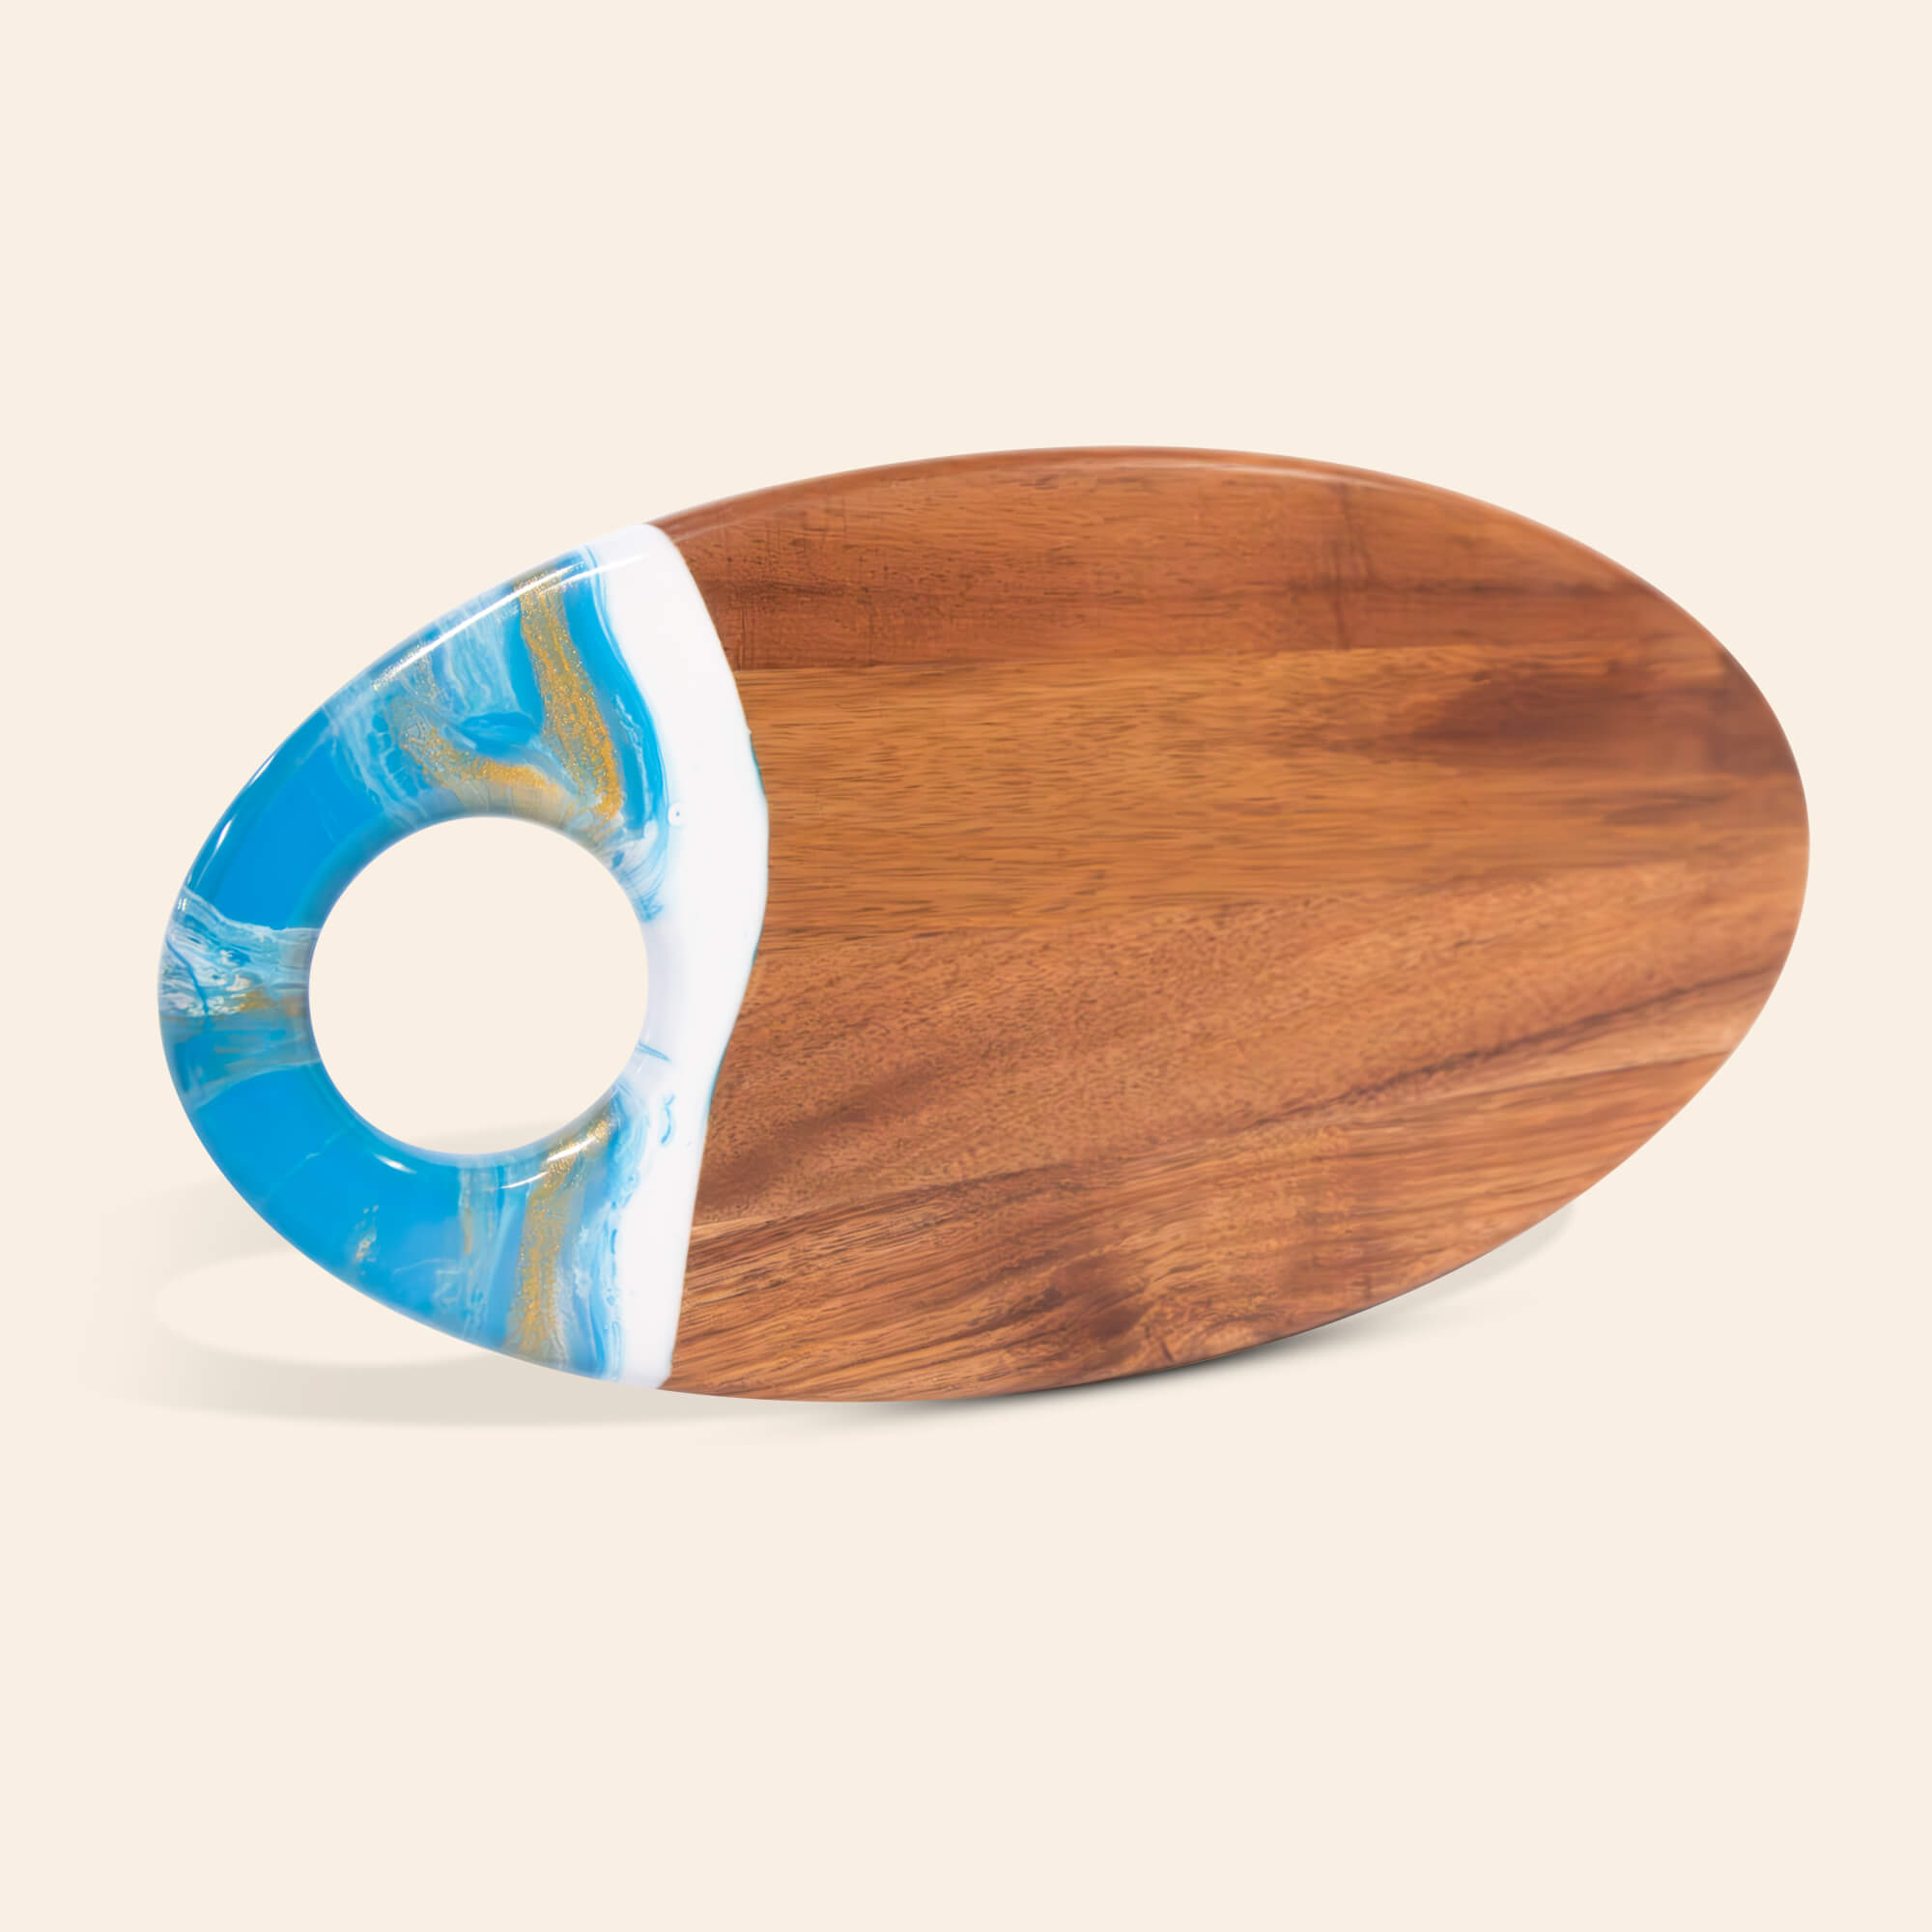 Large Oval Acacia Board With Dip Holder